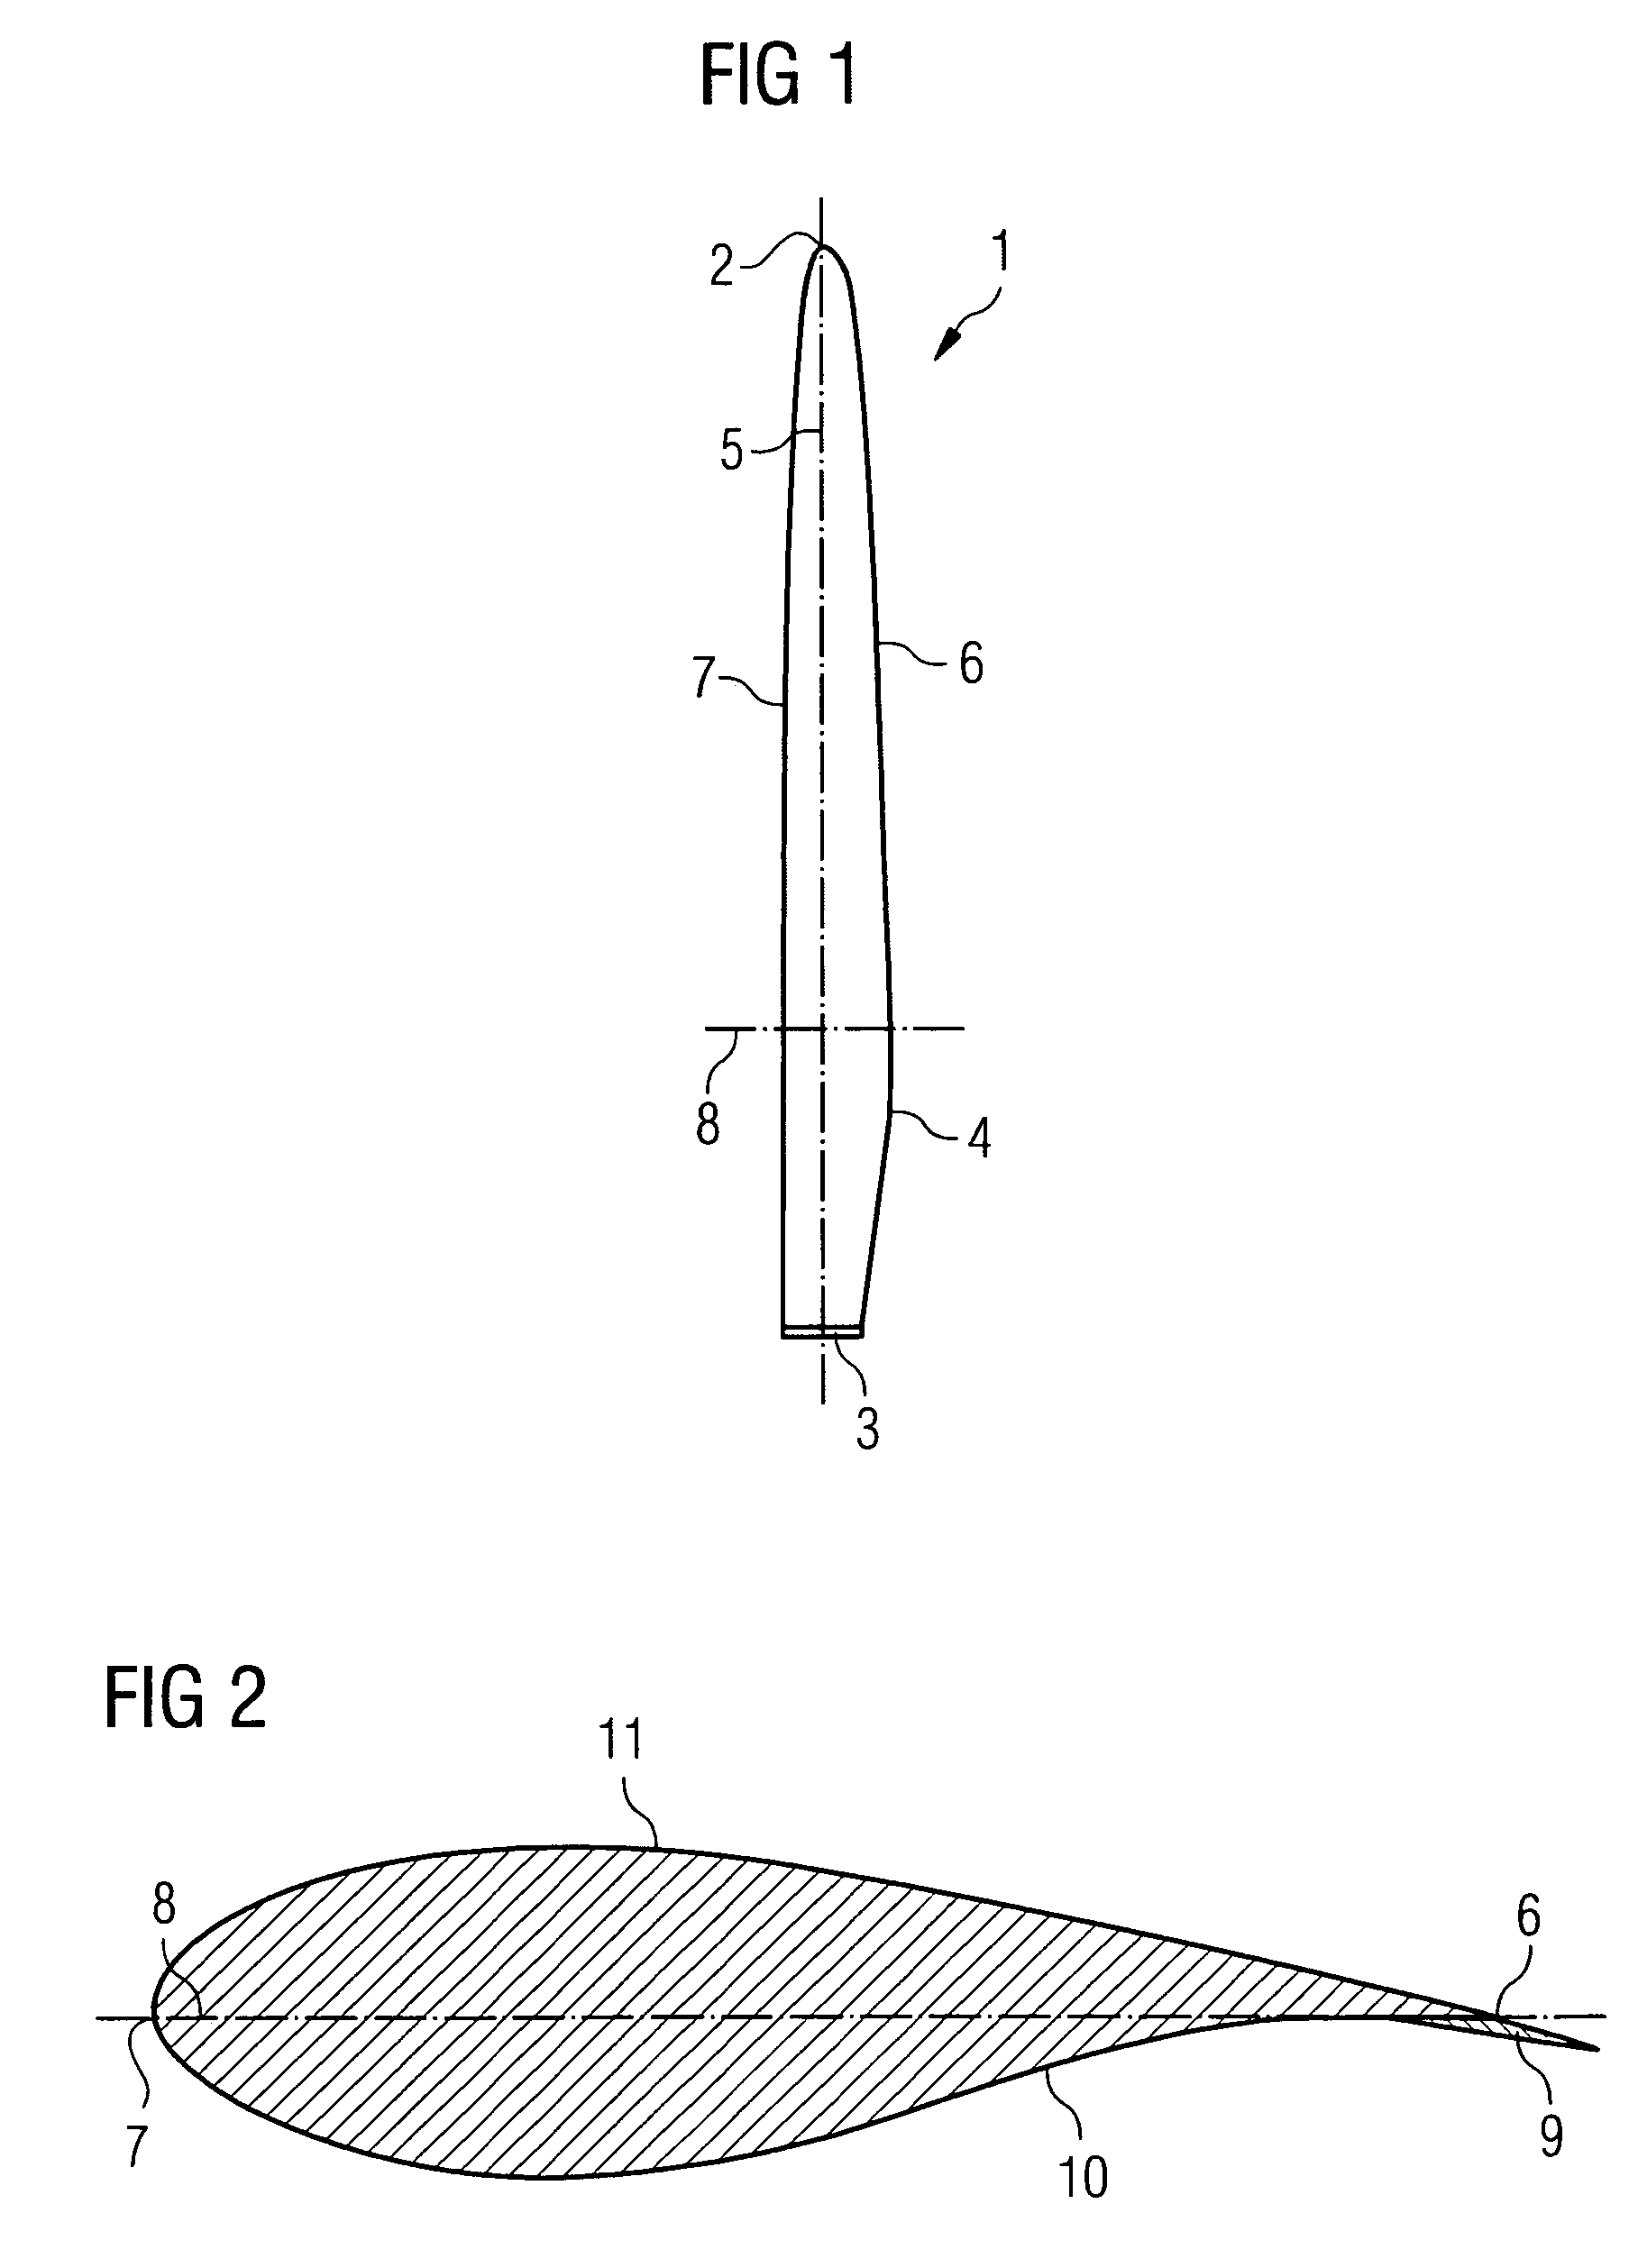 Actuation system for a wind turbine blade flap